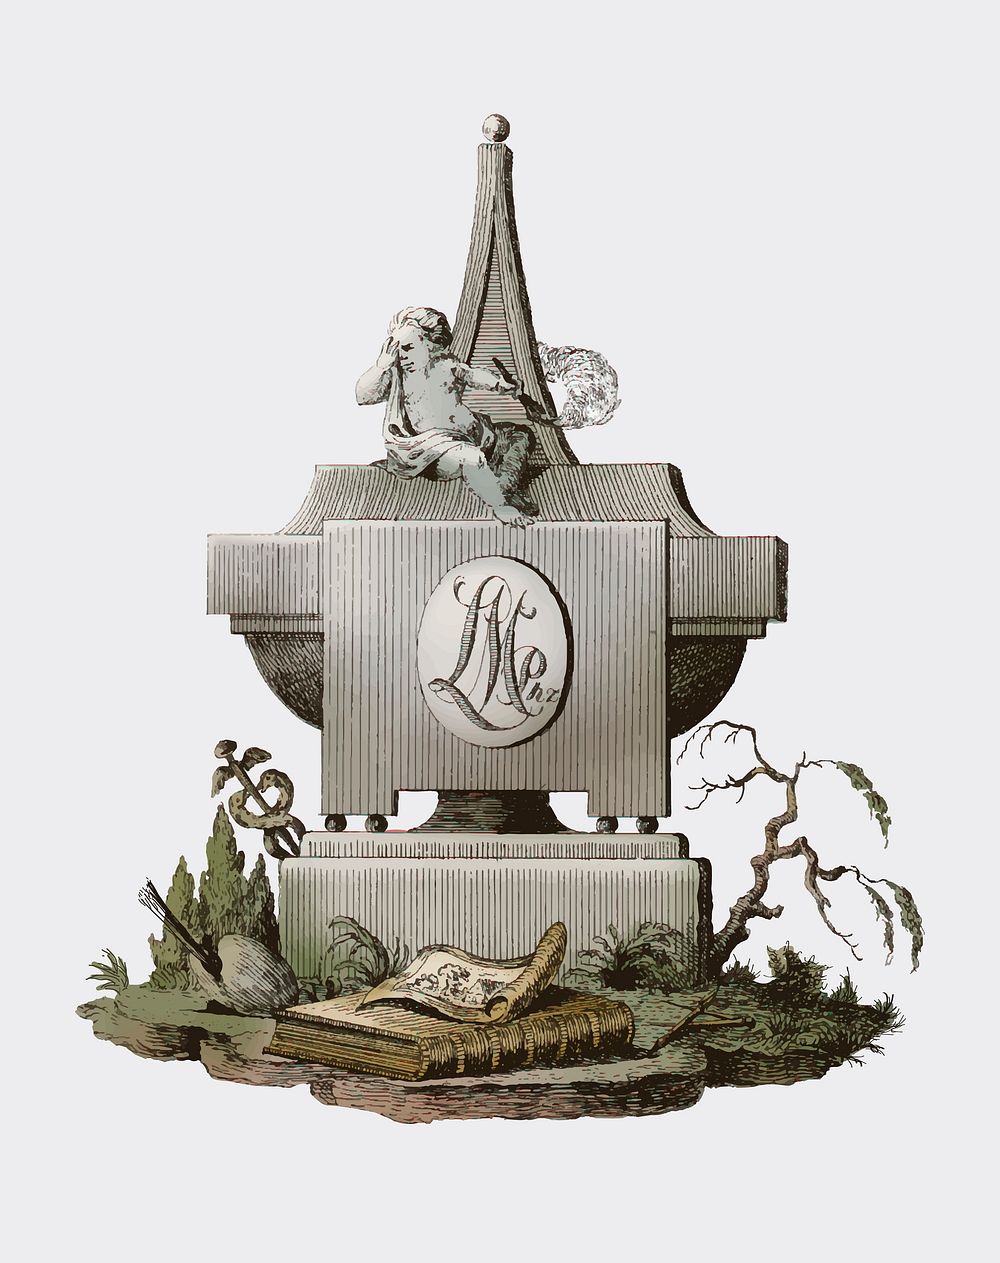 Gravestone with mourning angel (1799) by Jean Bernard (1775-1883). Original from the Rijks Museum. Digitally enhanced by…